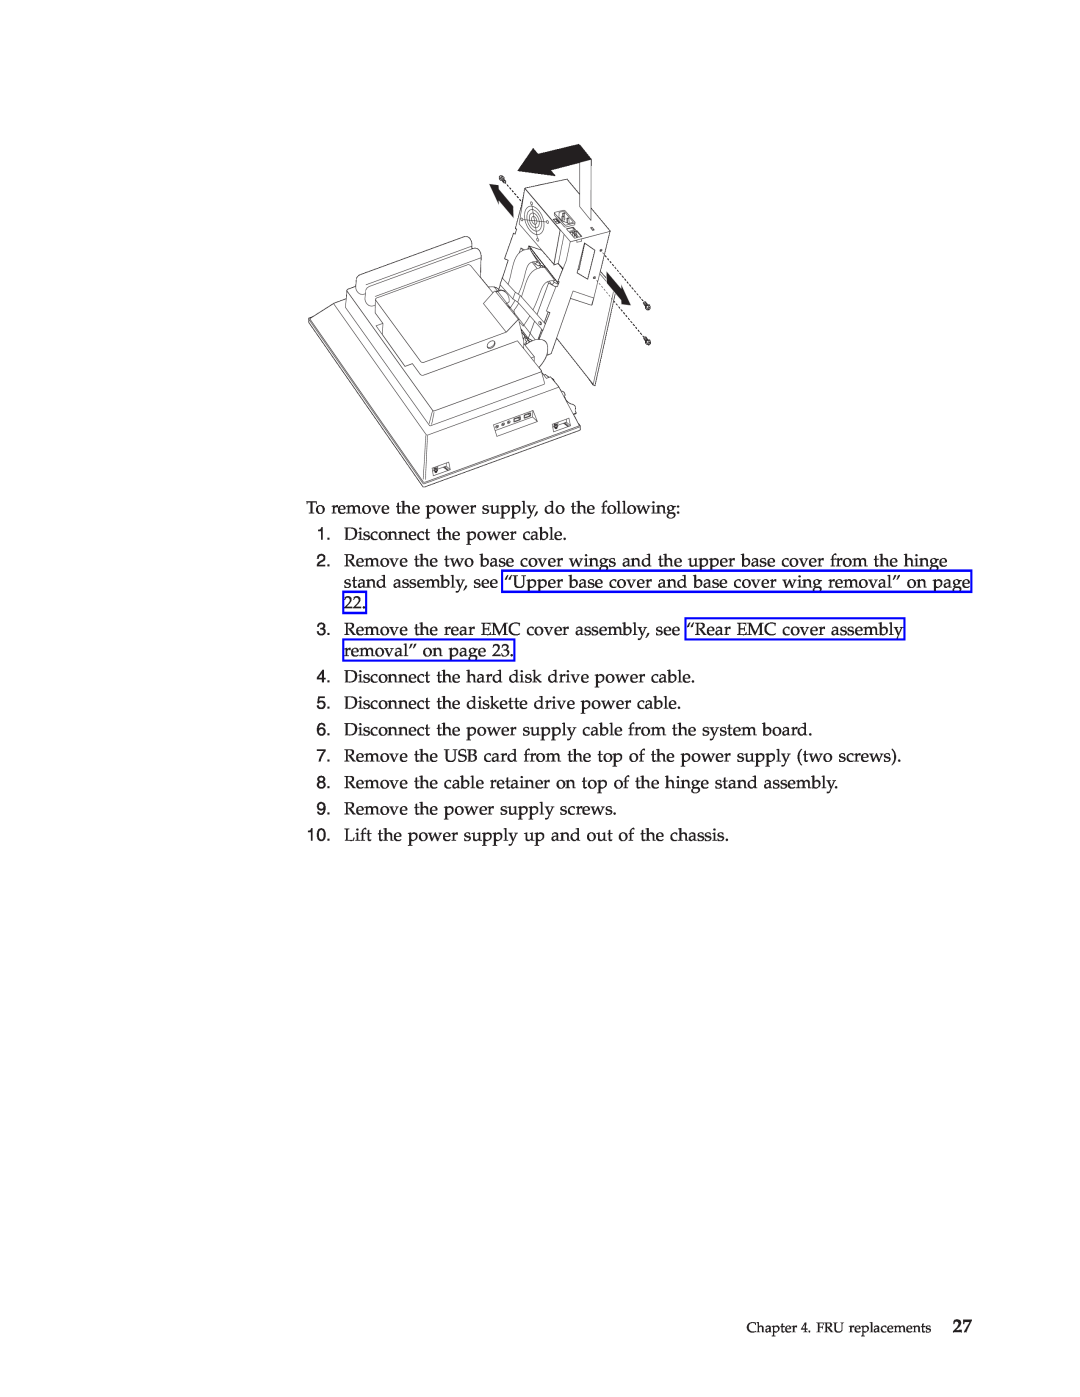 IBM 2179, 6643 manual To remove the power supply, do the following 